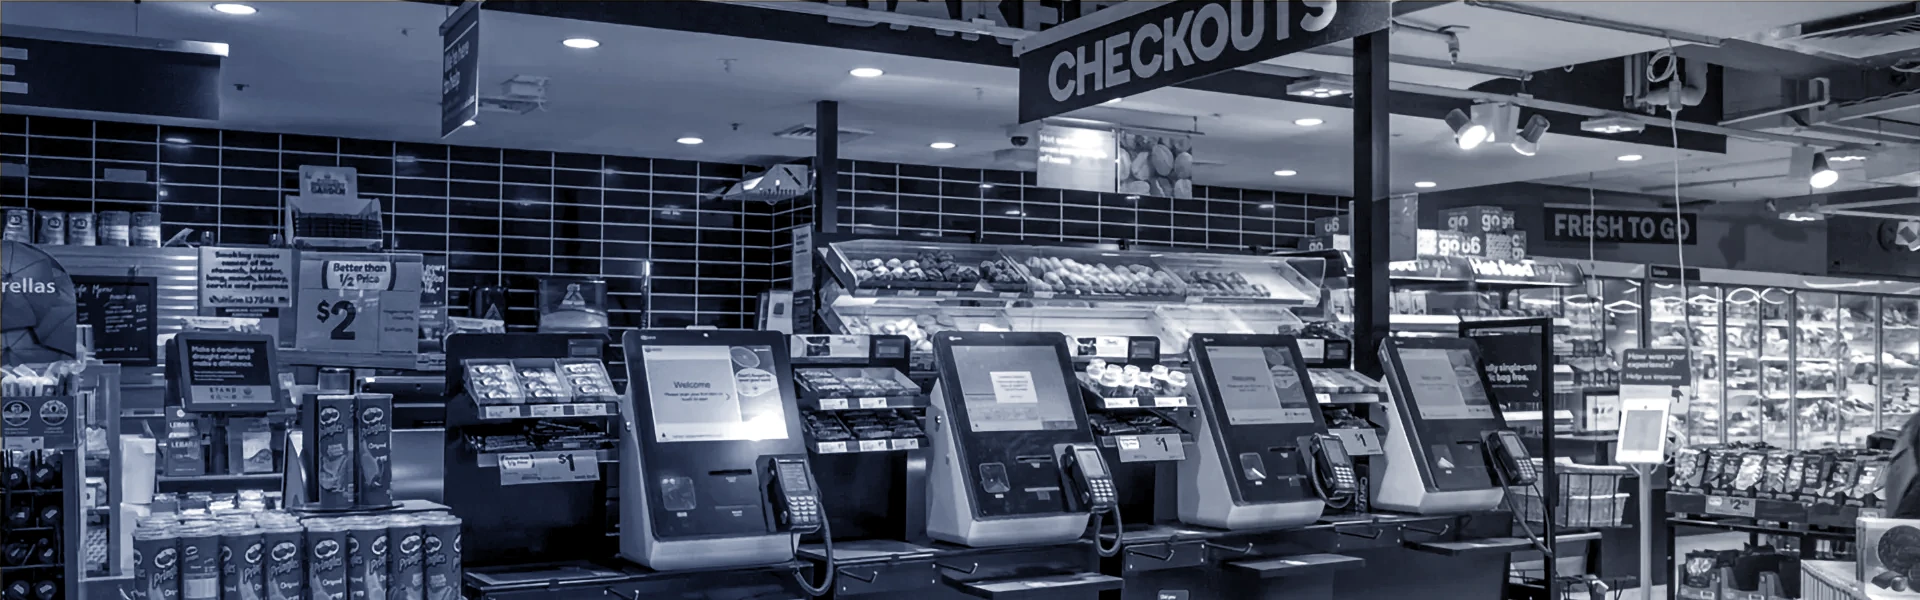 Solutions by Device - Self-Checkouts